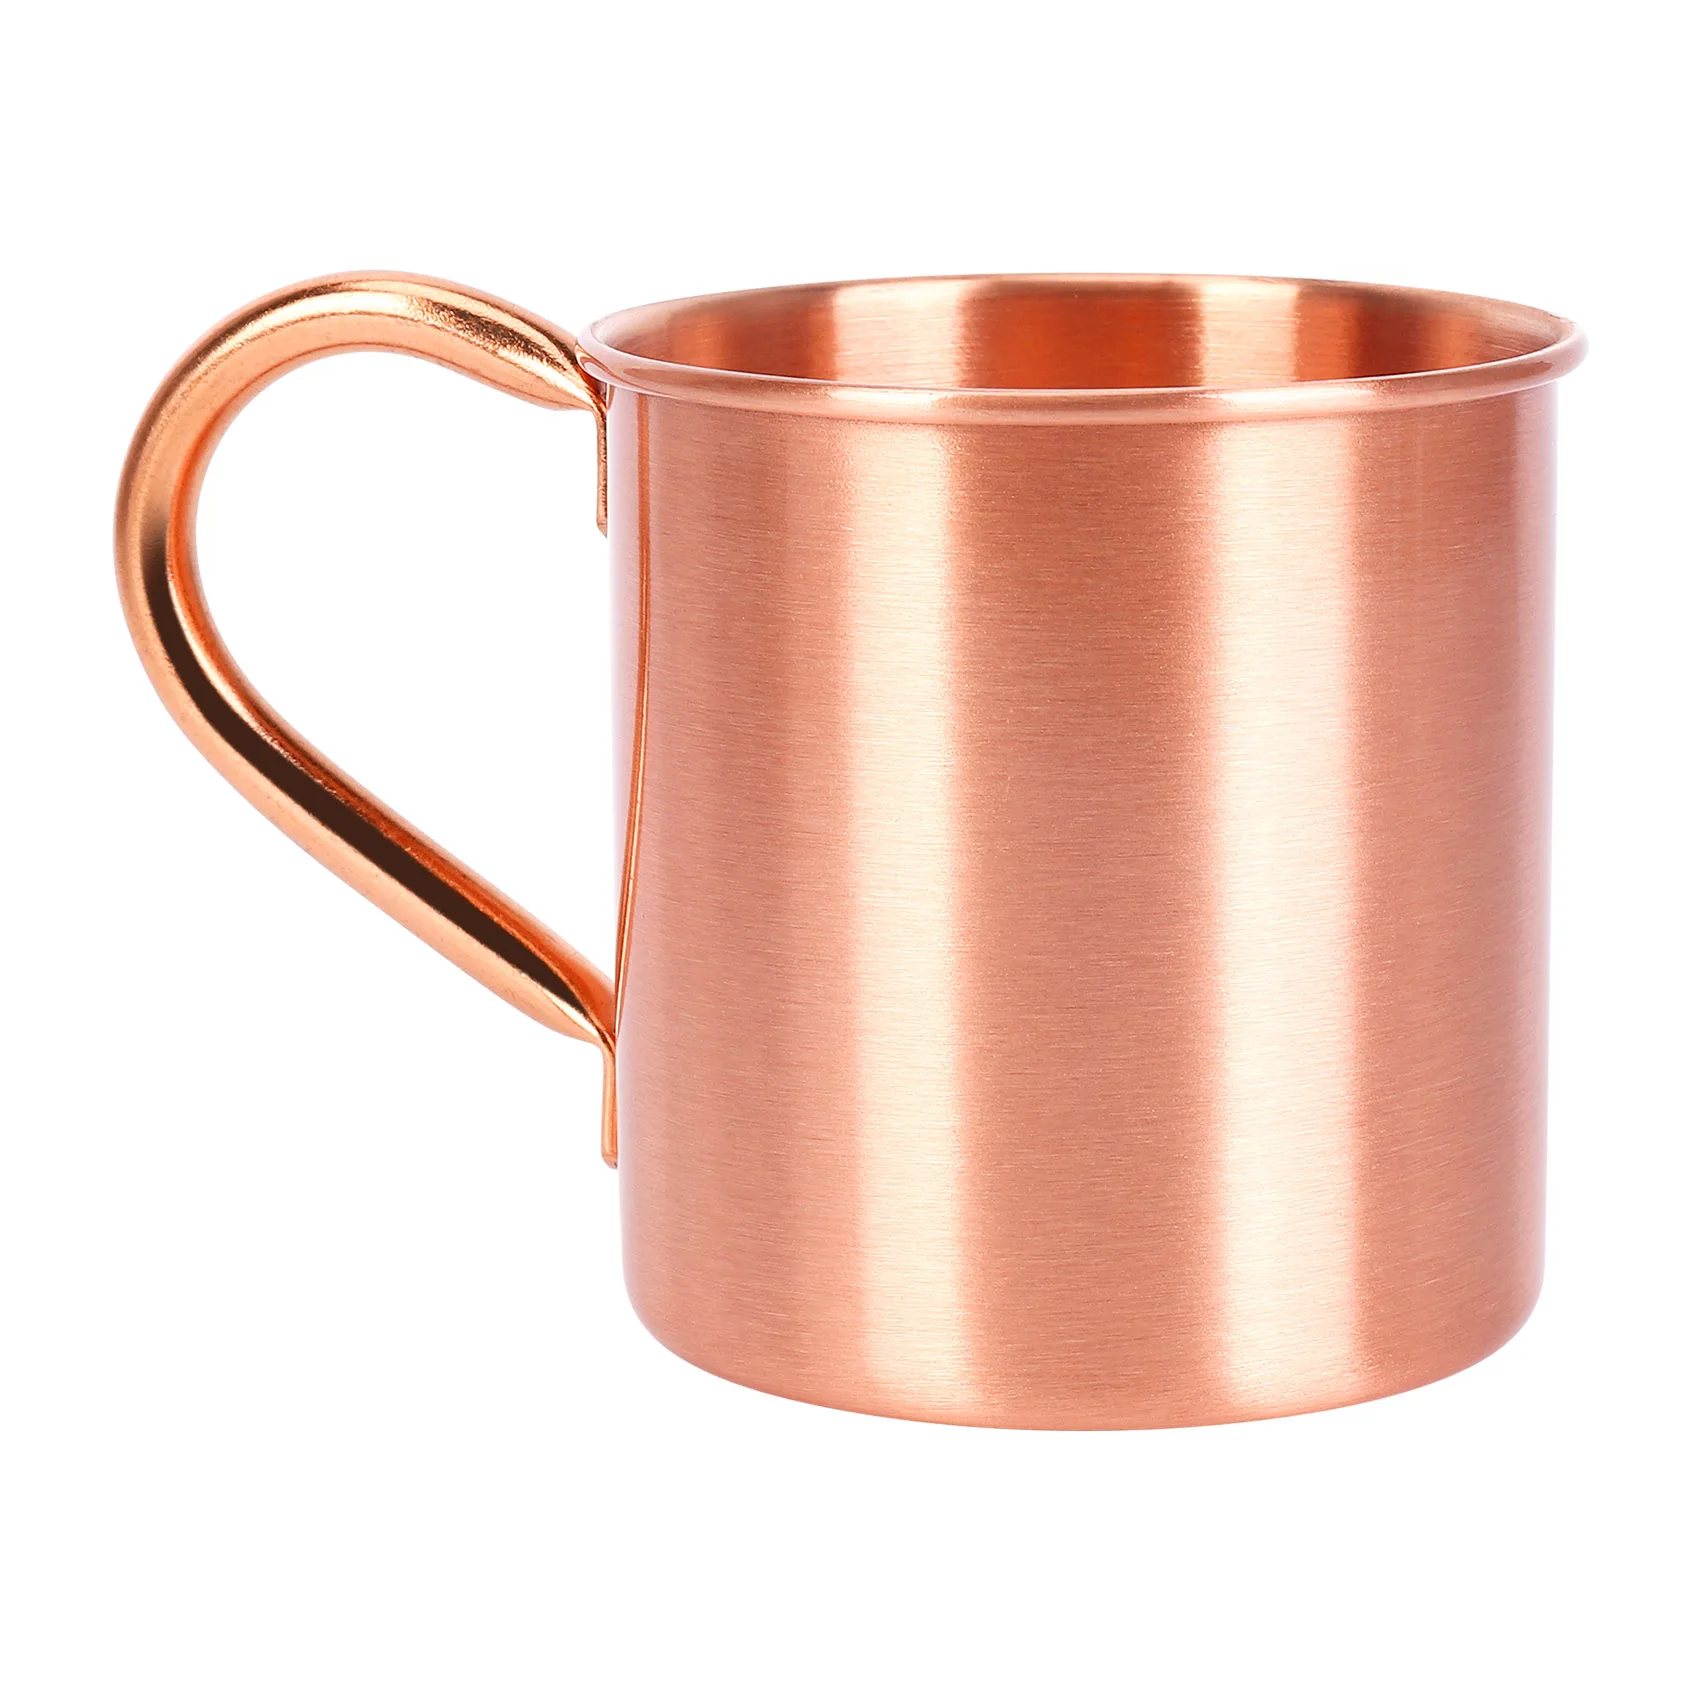 

Pure Copper Moscow Mule Mug Solid Smooth Without Inside Liner For Cocktail Coffee Beer Milk Water Cup Home Bar Drinkware Cool